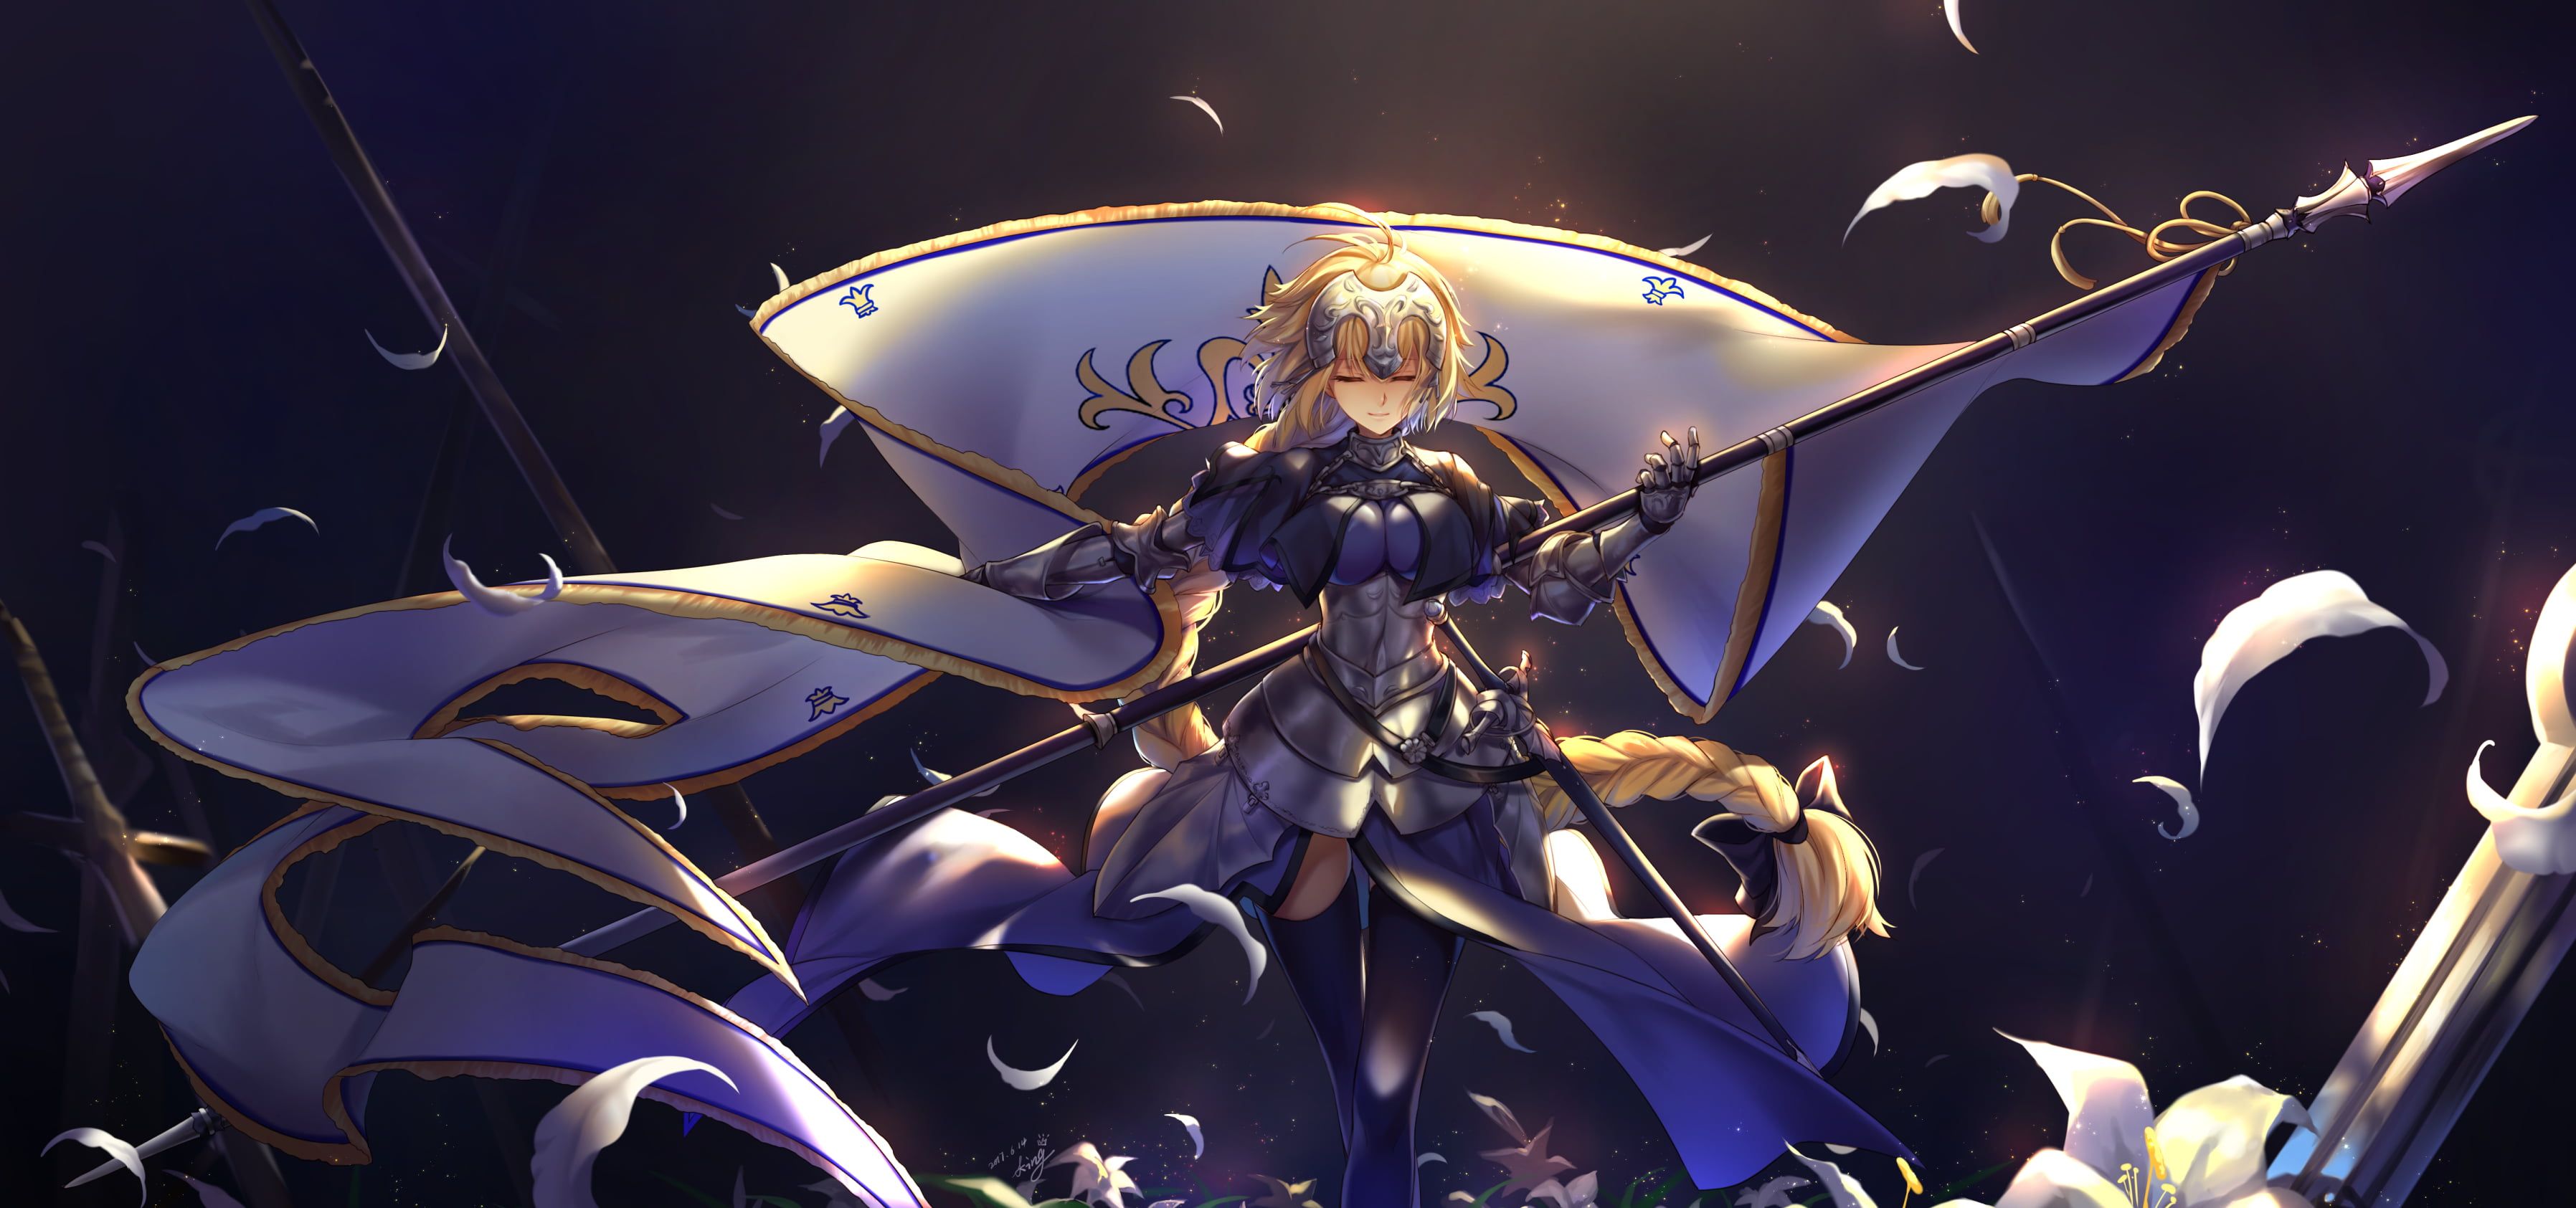 Saber From Fate Stay Knight, Fate Grand Order, Fate Series, Jeanne